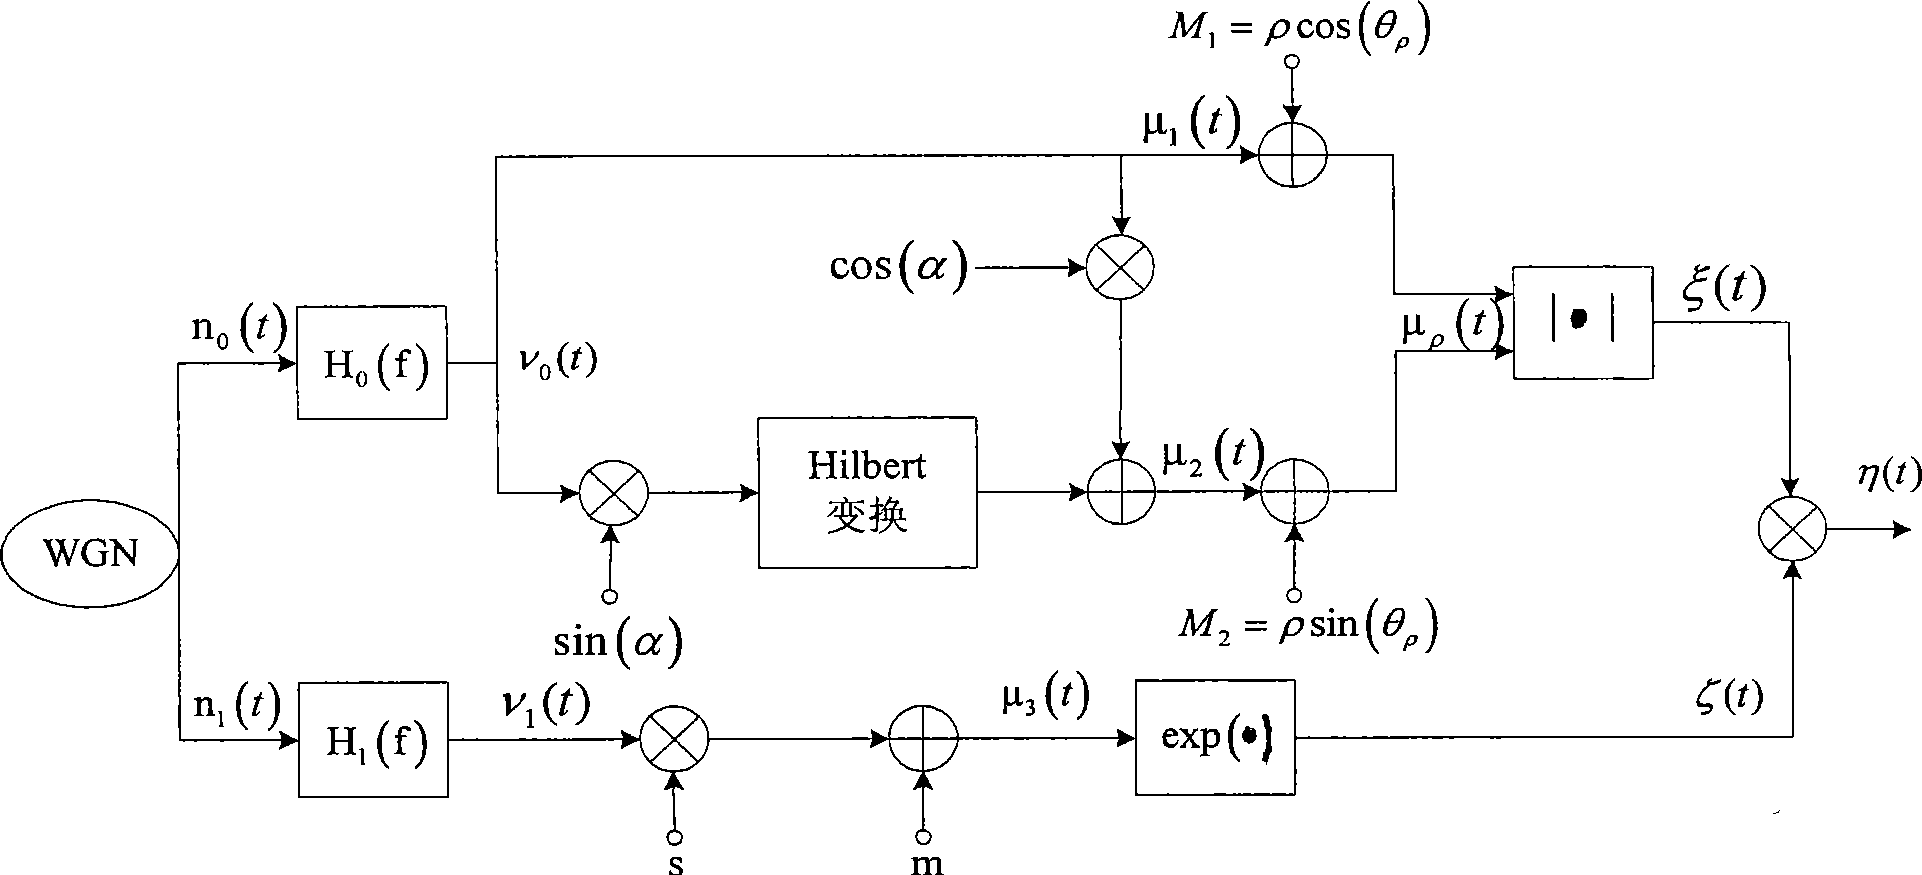 Wireless fading channel simulation system and method based on spreading Suzuki model